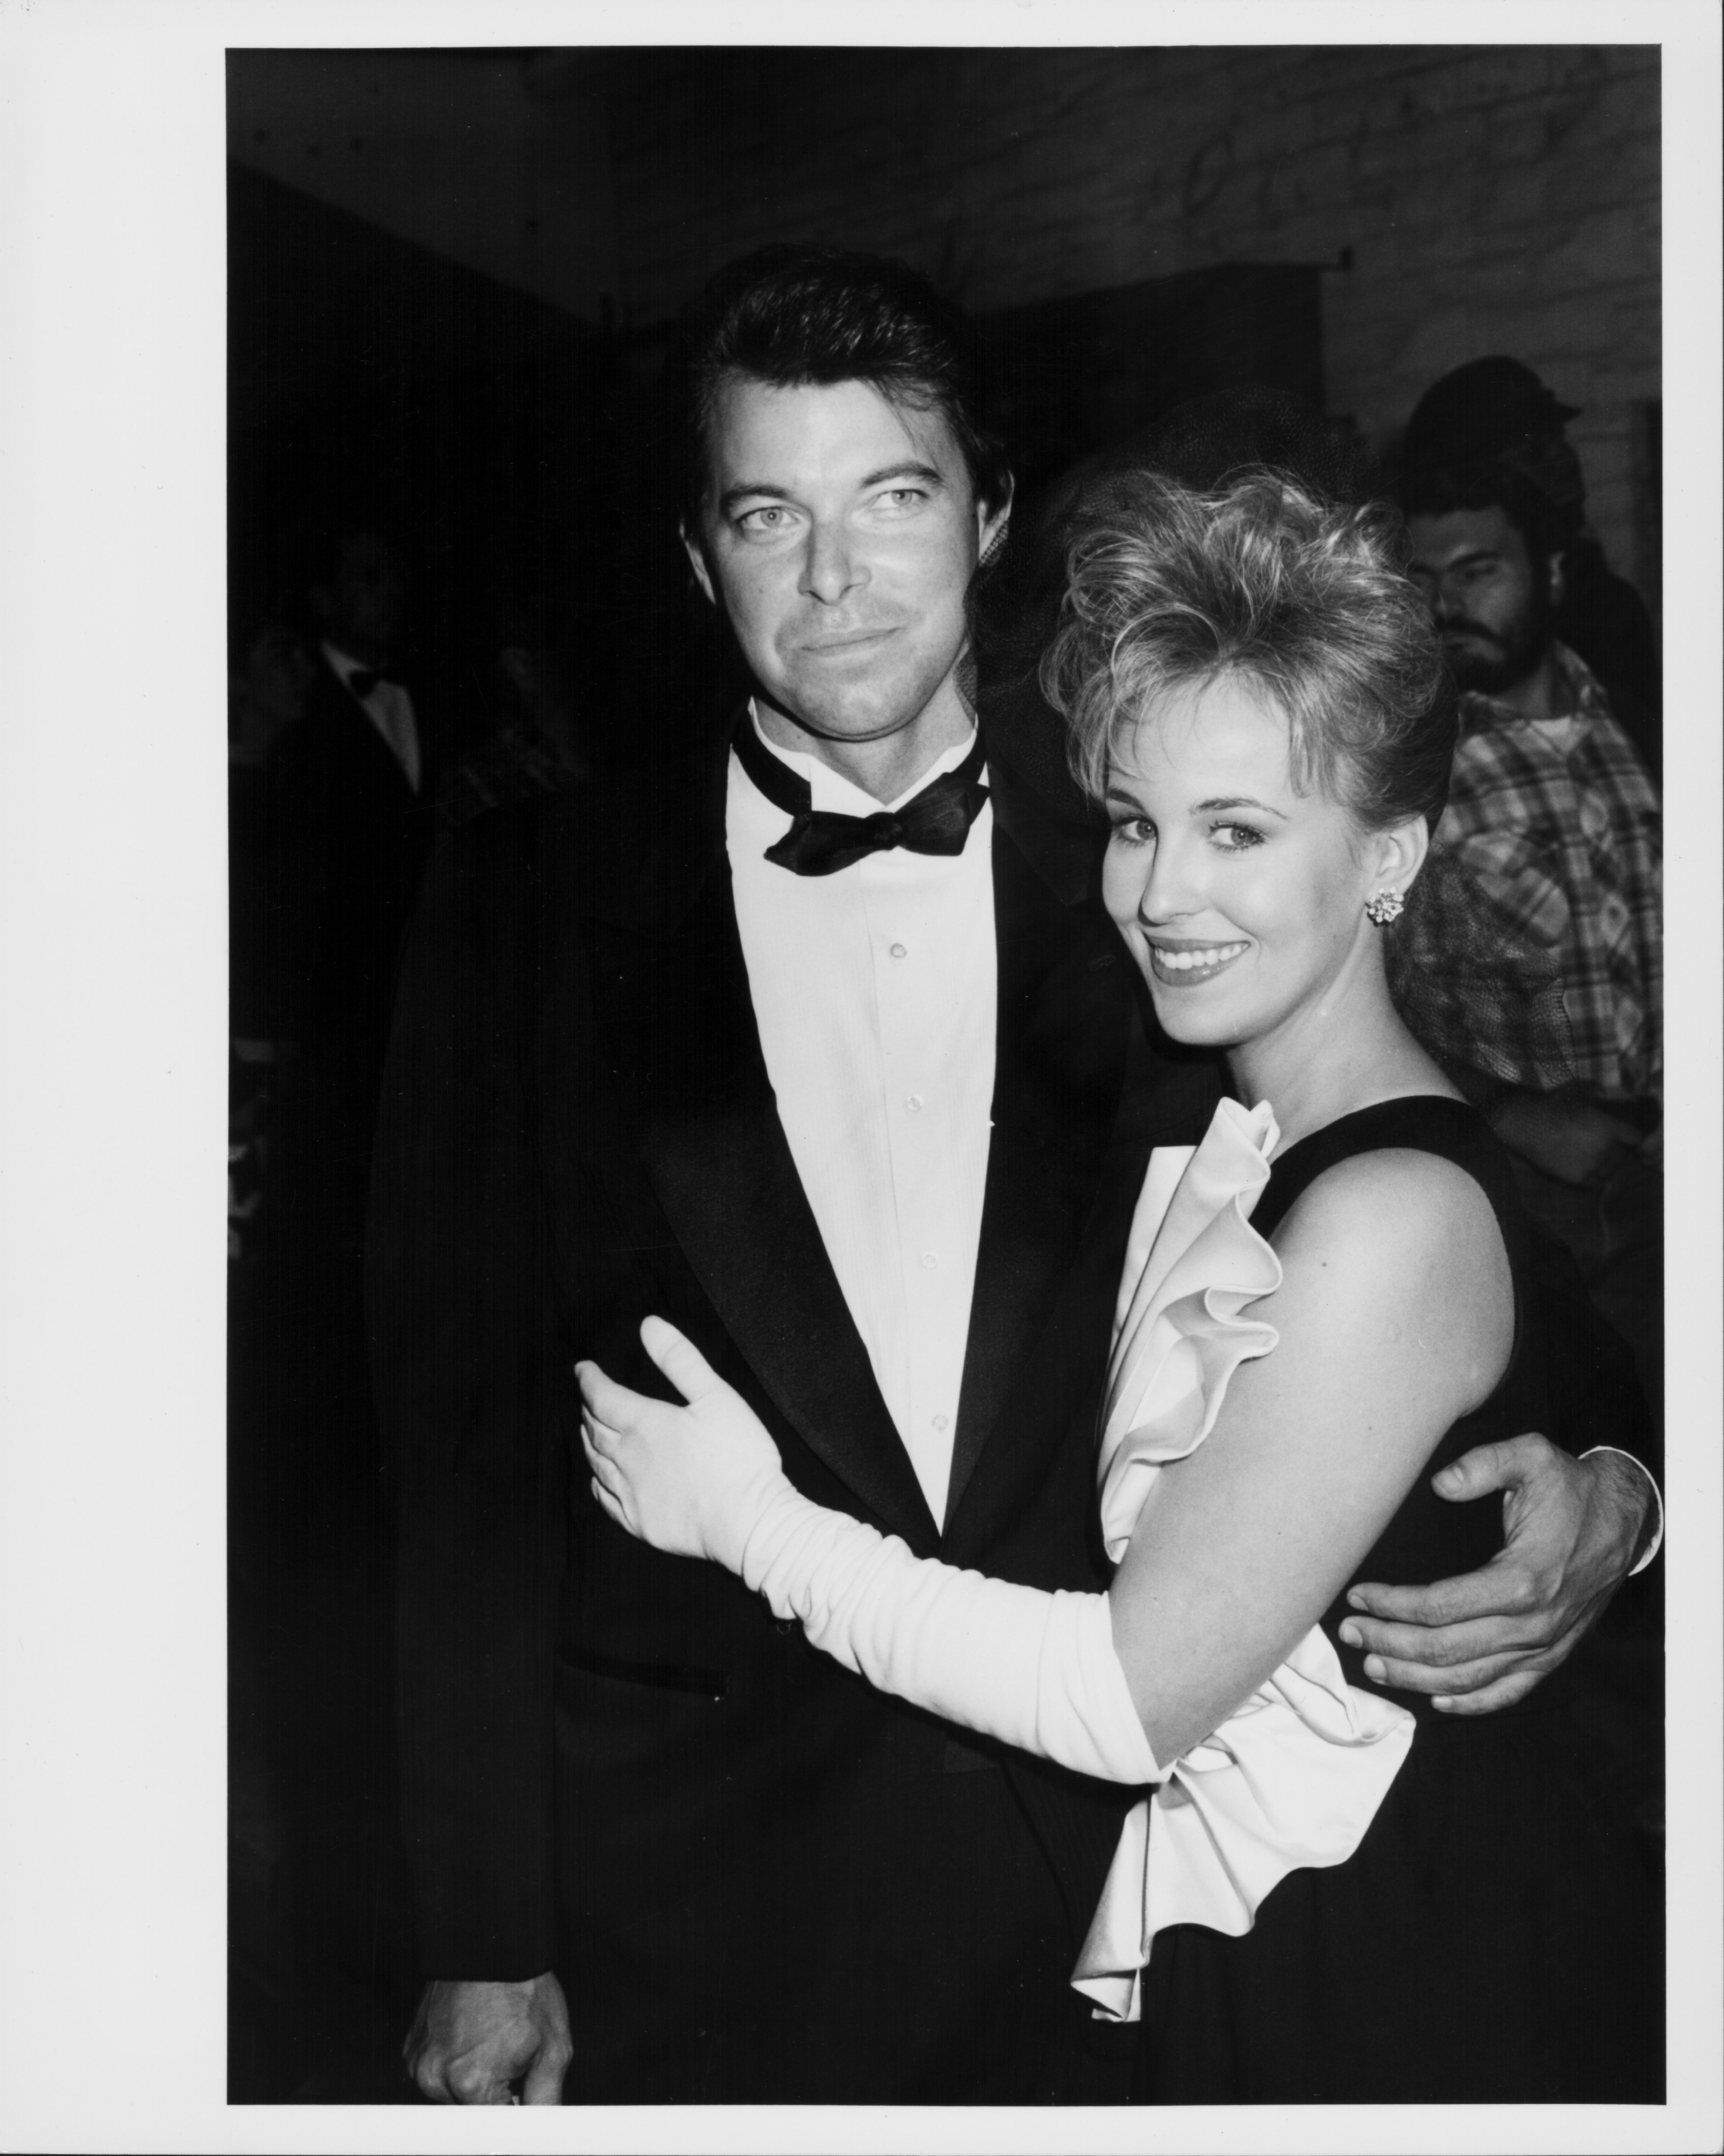 Jonathan Frakes and Genie Francis at the Soap Opera Awards, in Hollywood, California, on November 16, 1986. | Source: Frank Edwards/Archive Photos/Getty Images